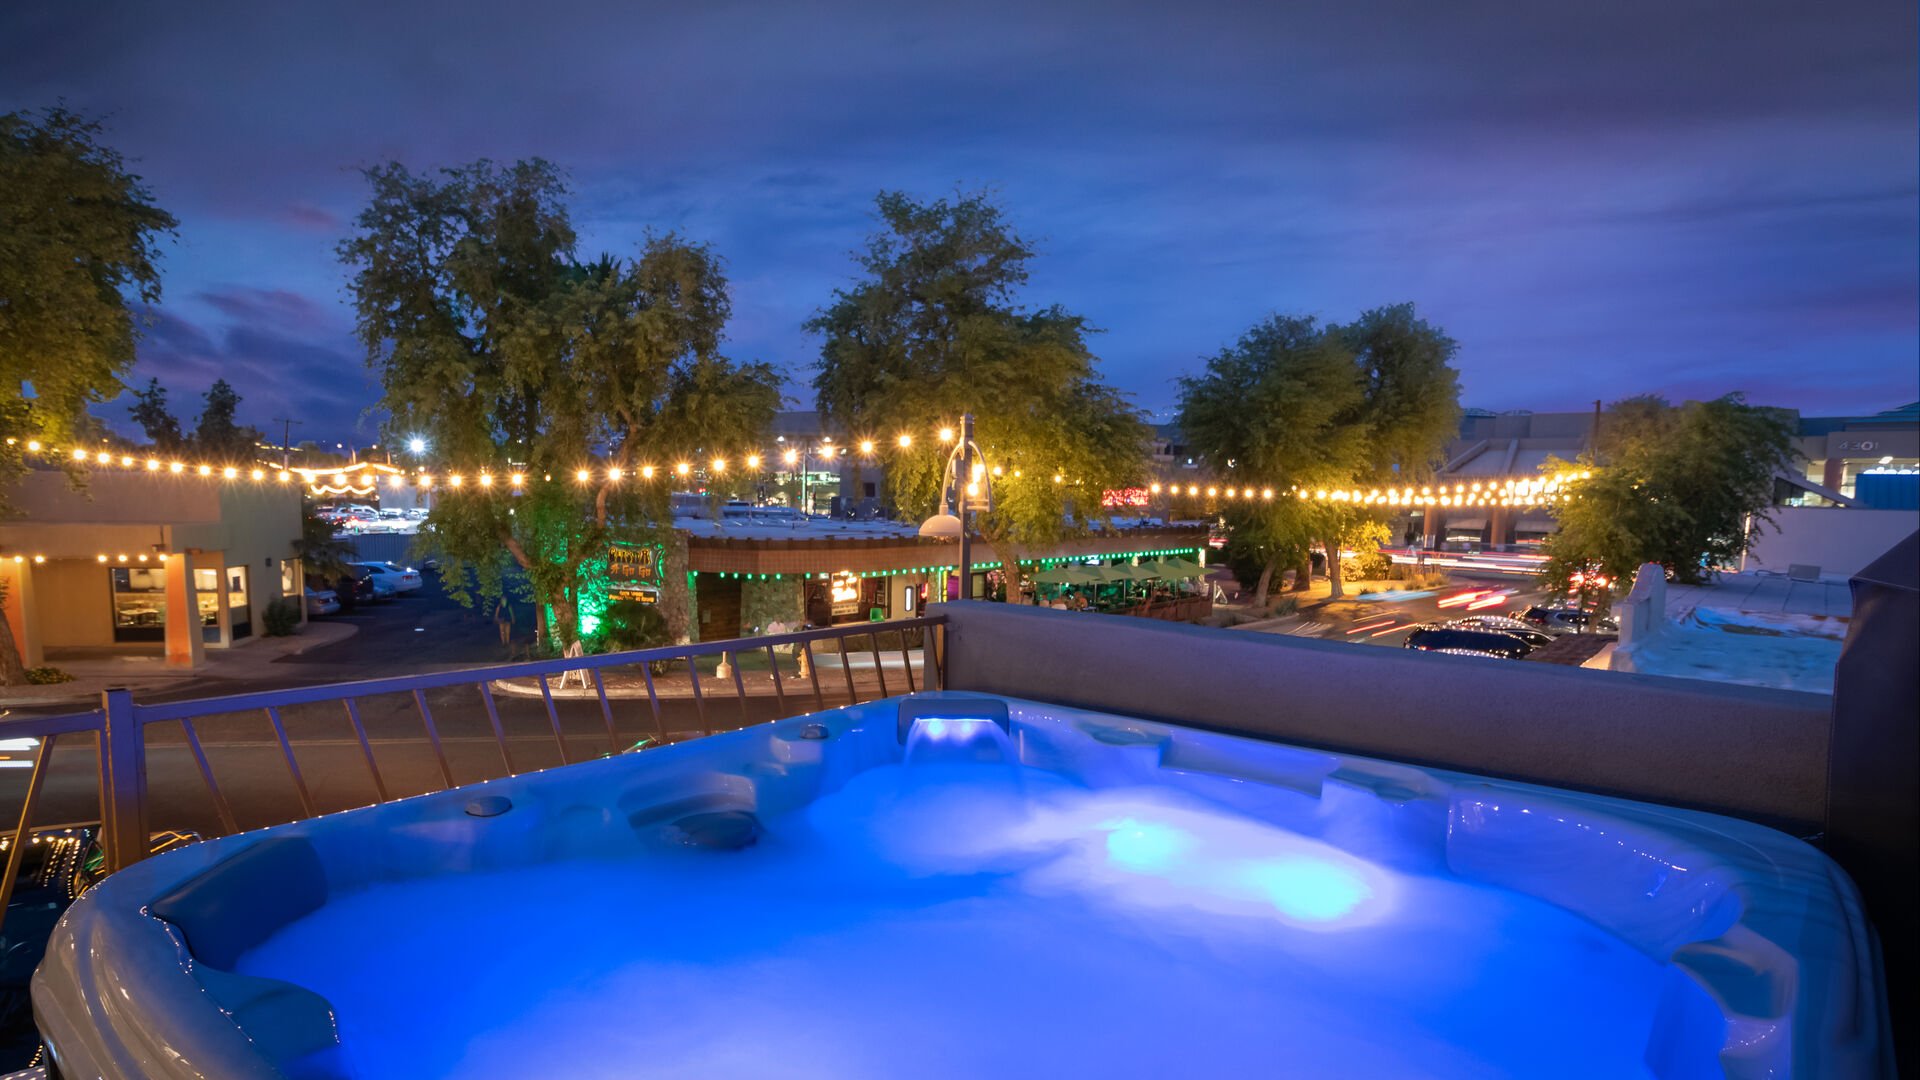 Enjoy sitting in the hot overlooking all Scottsdale's nightlife and when the town shutdown you have the entire city to yourself!